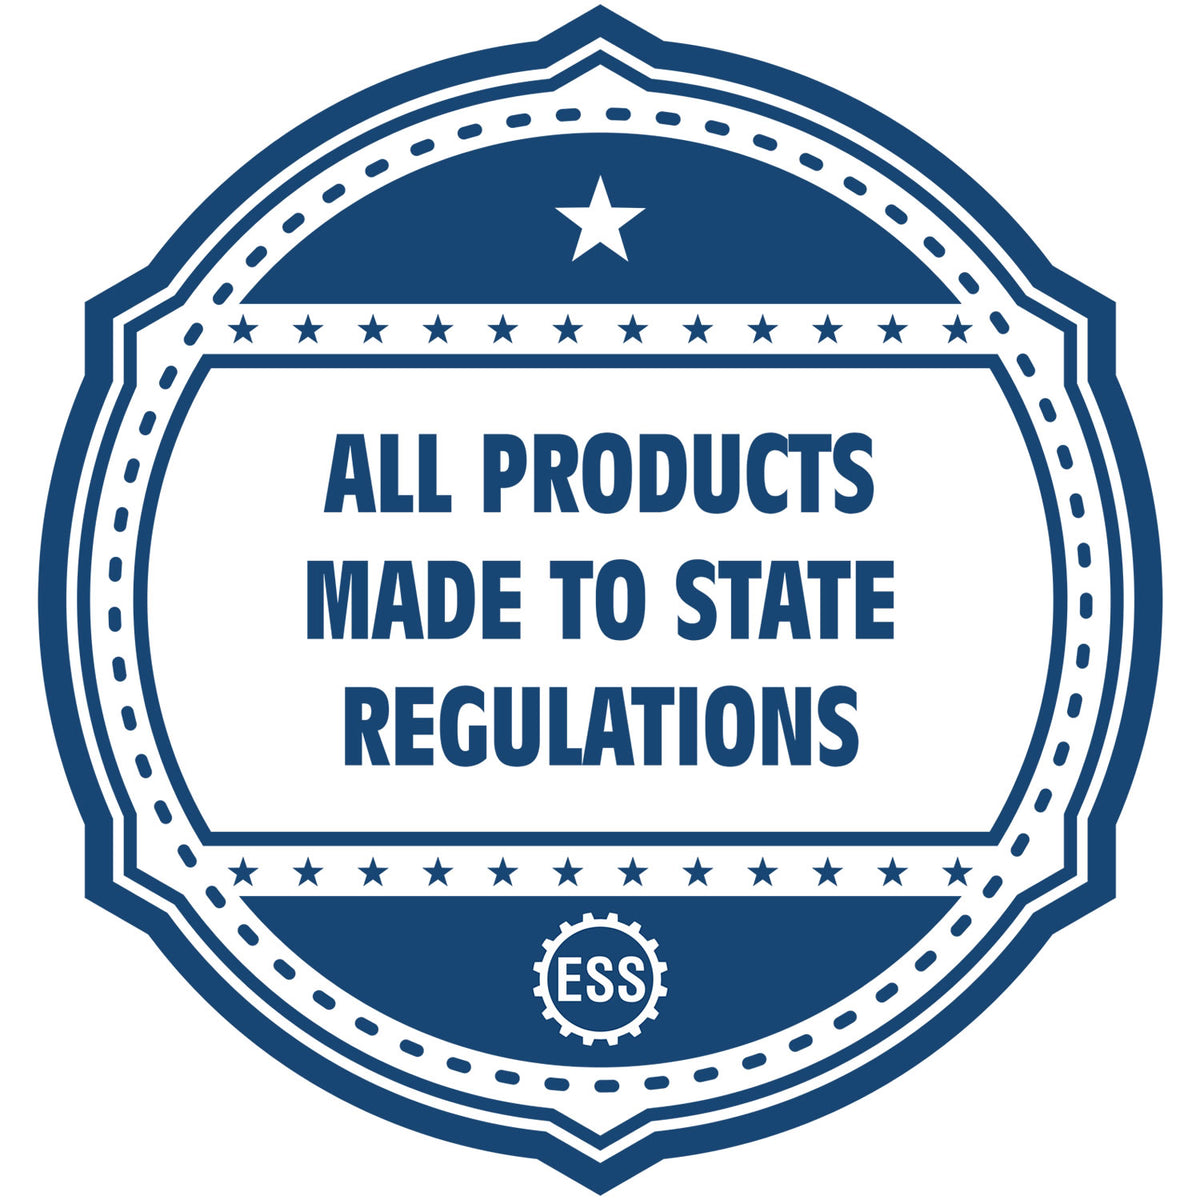 An icon or badge element for the Long Reach Ohio PE Seal showing that this product is made in compliance with state regulations.